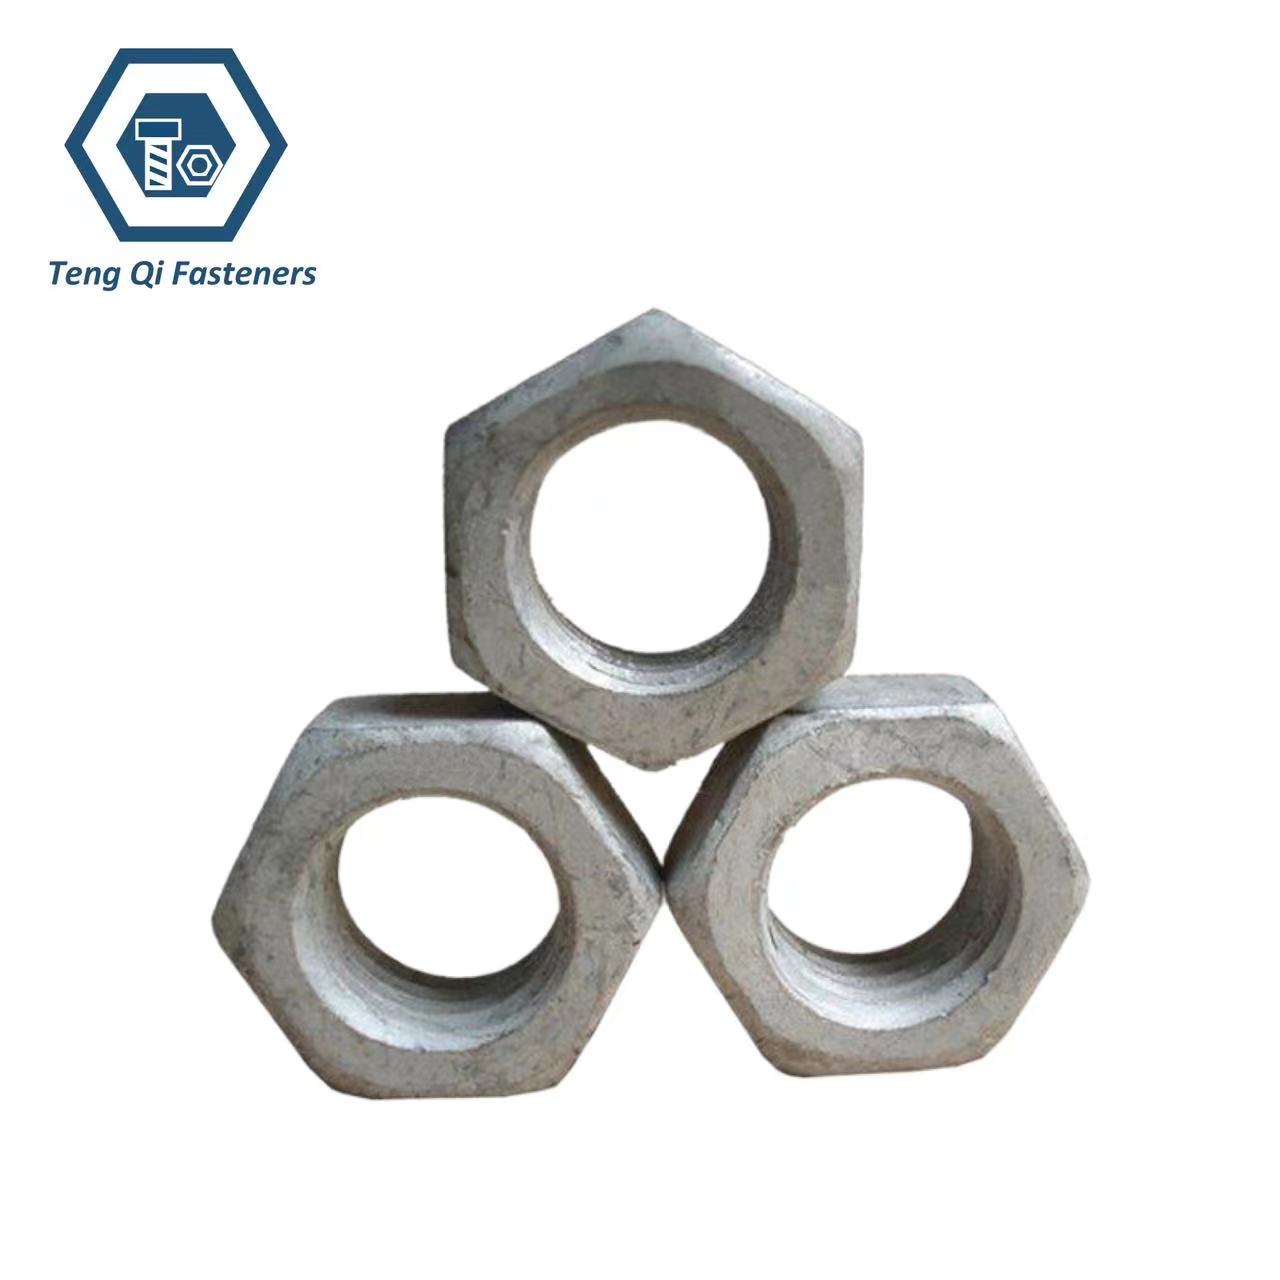 GOST5915 Hot Dip Galvanized Hex Nuts